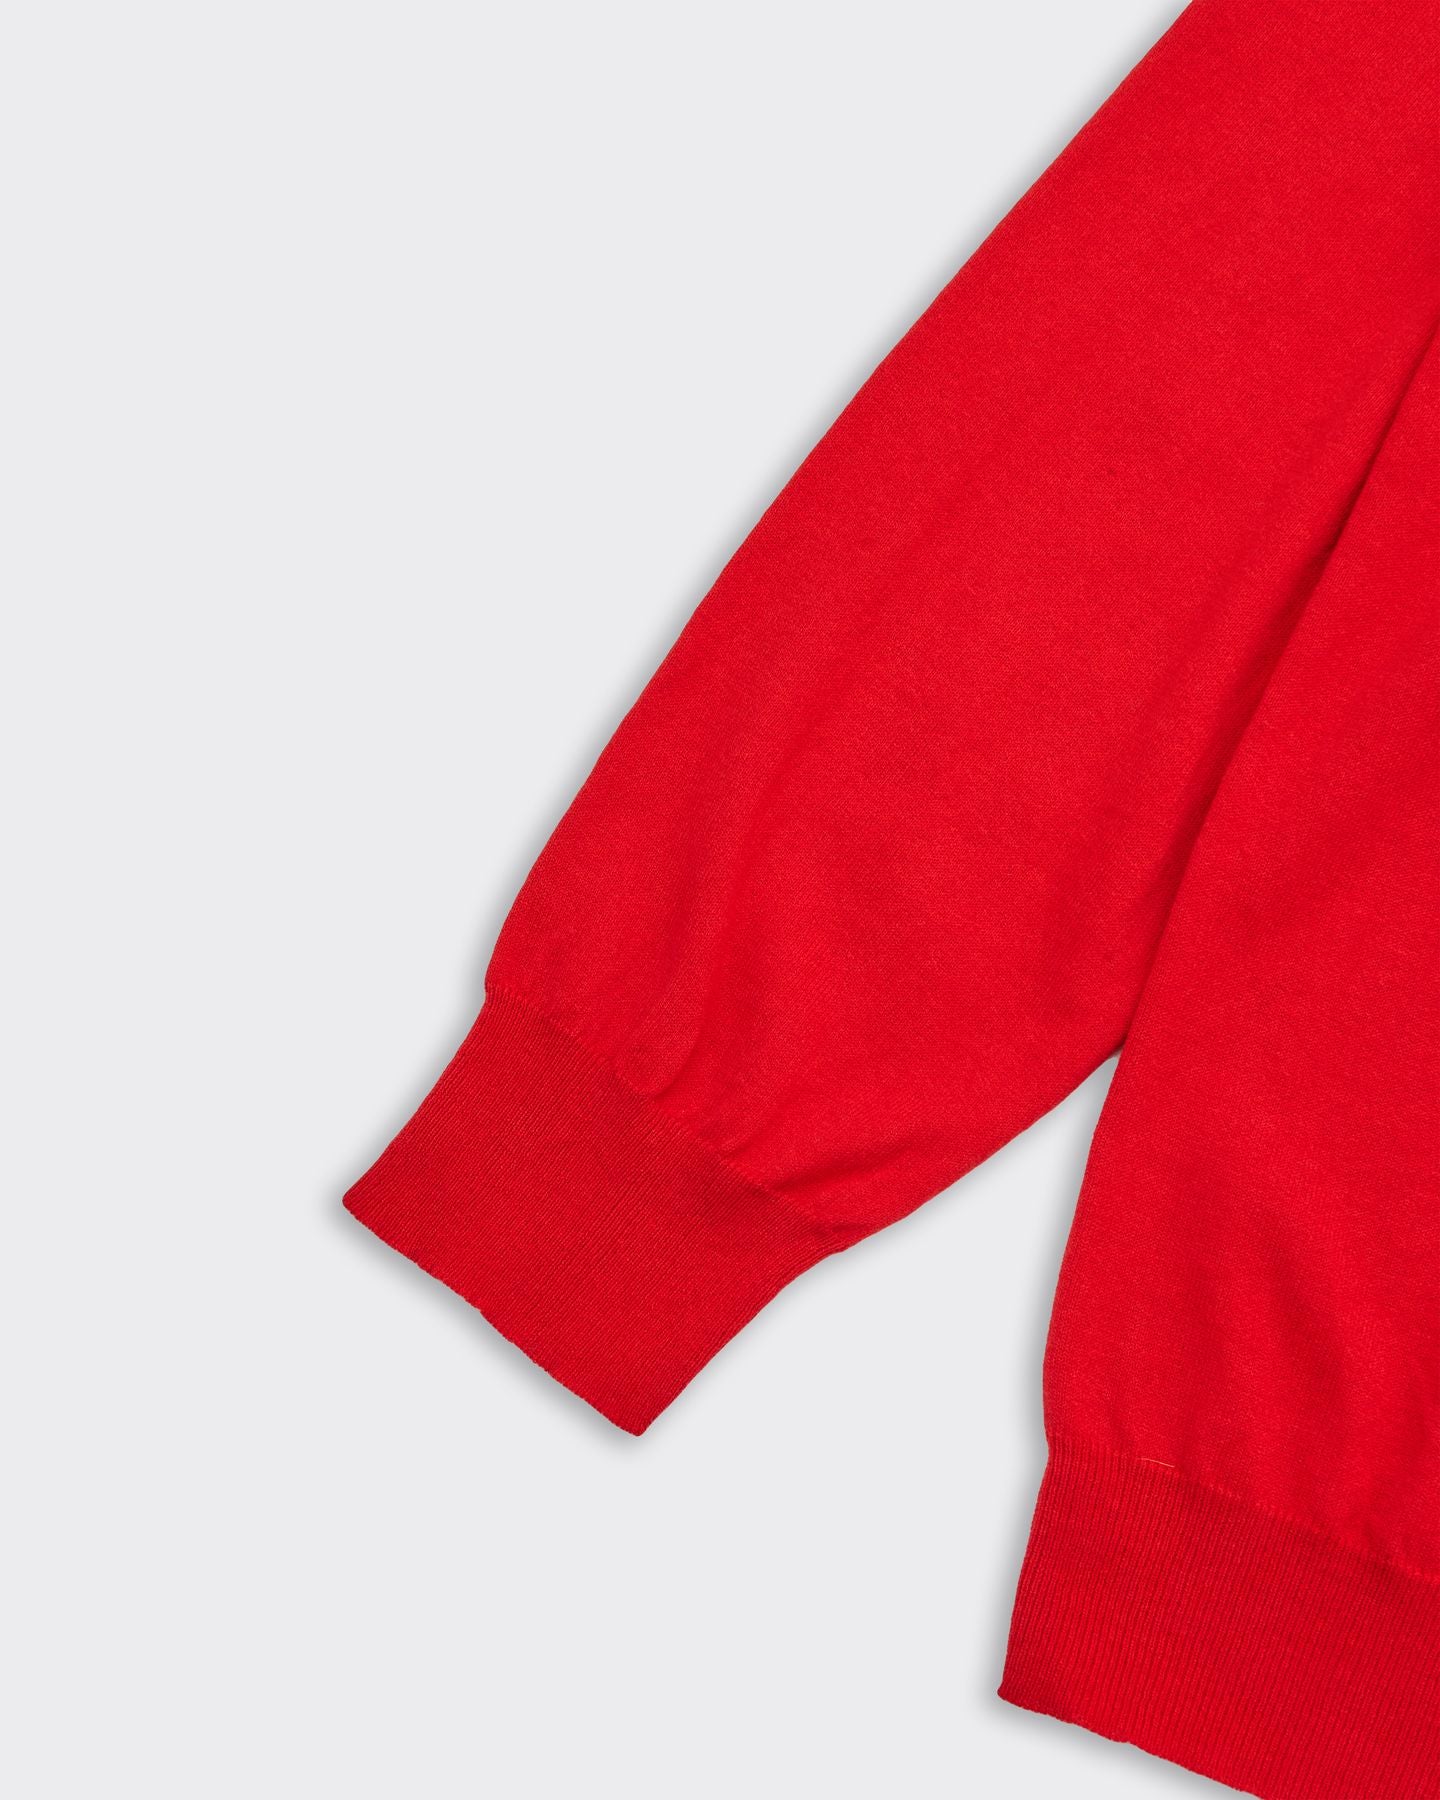 Red Cotton Sweater